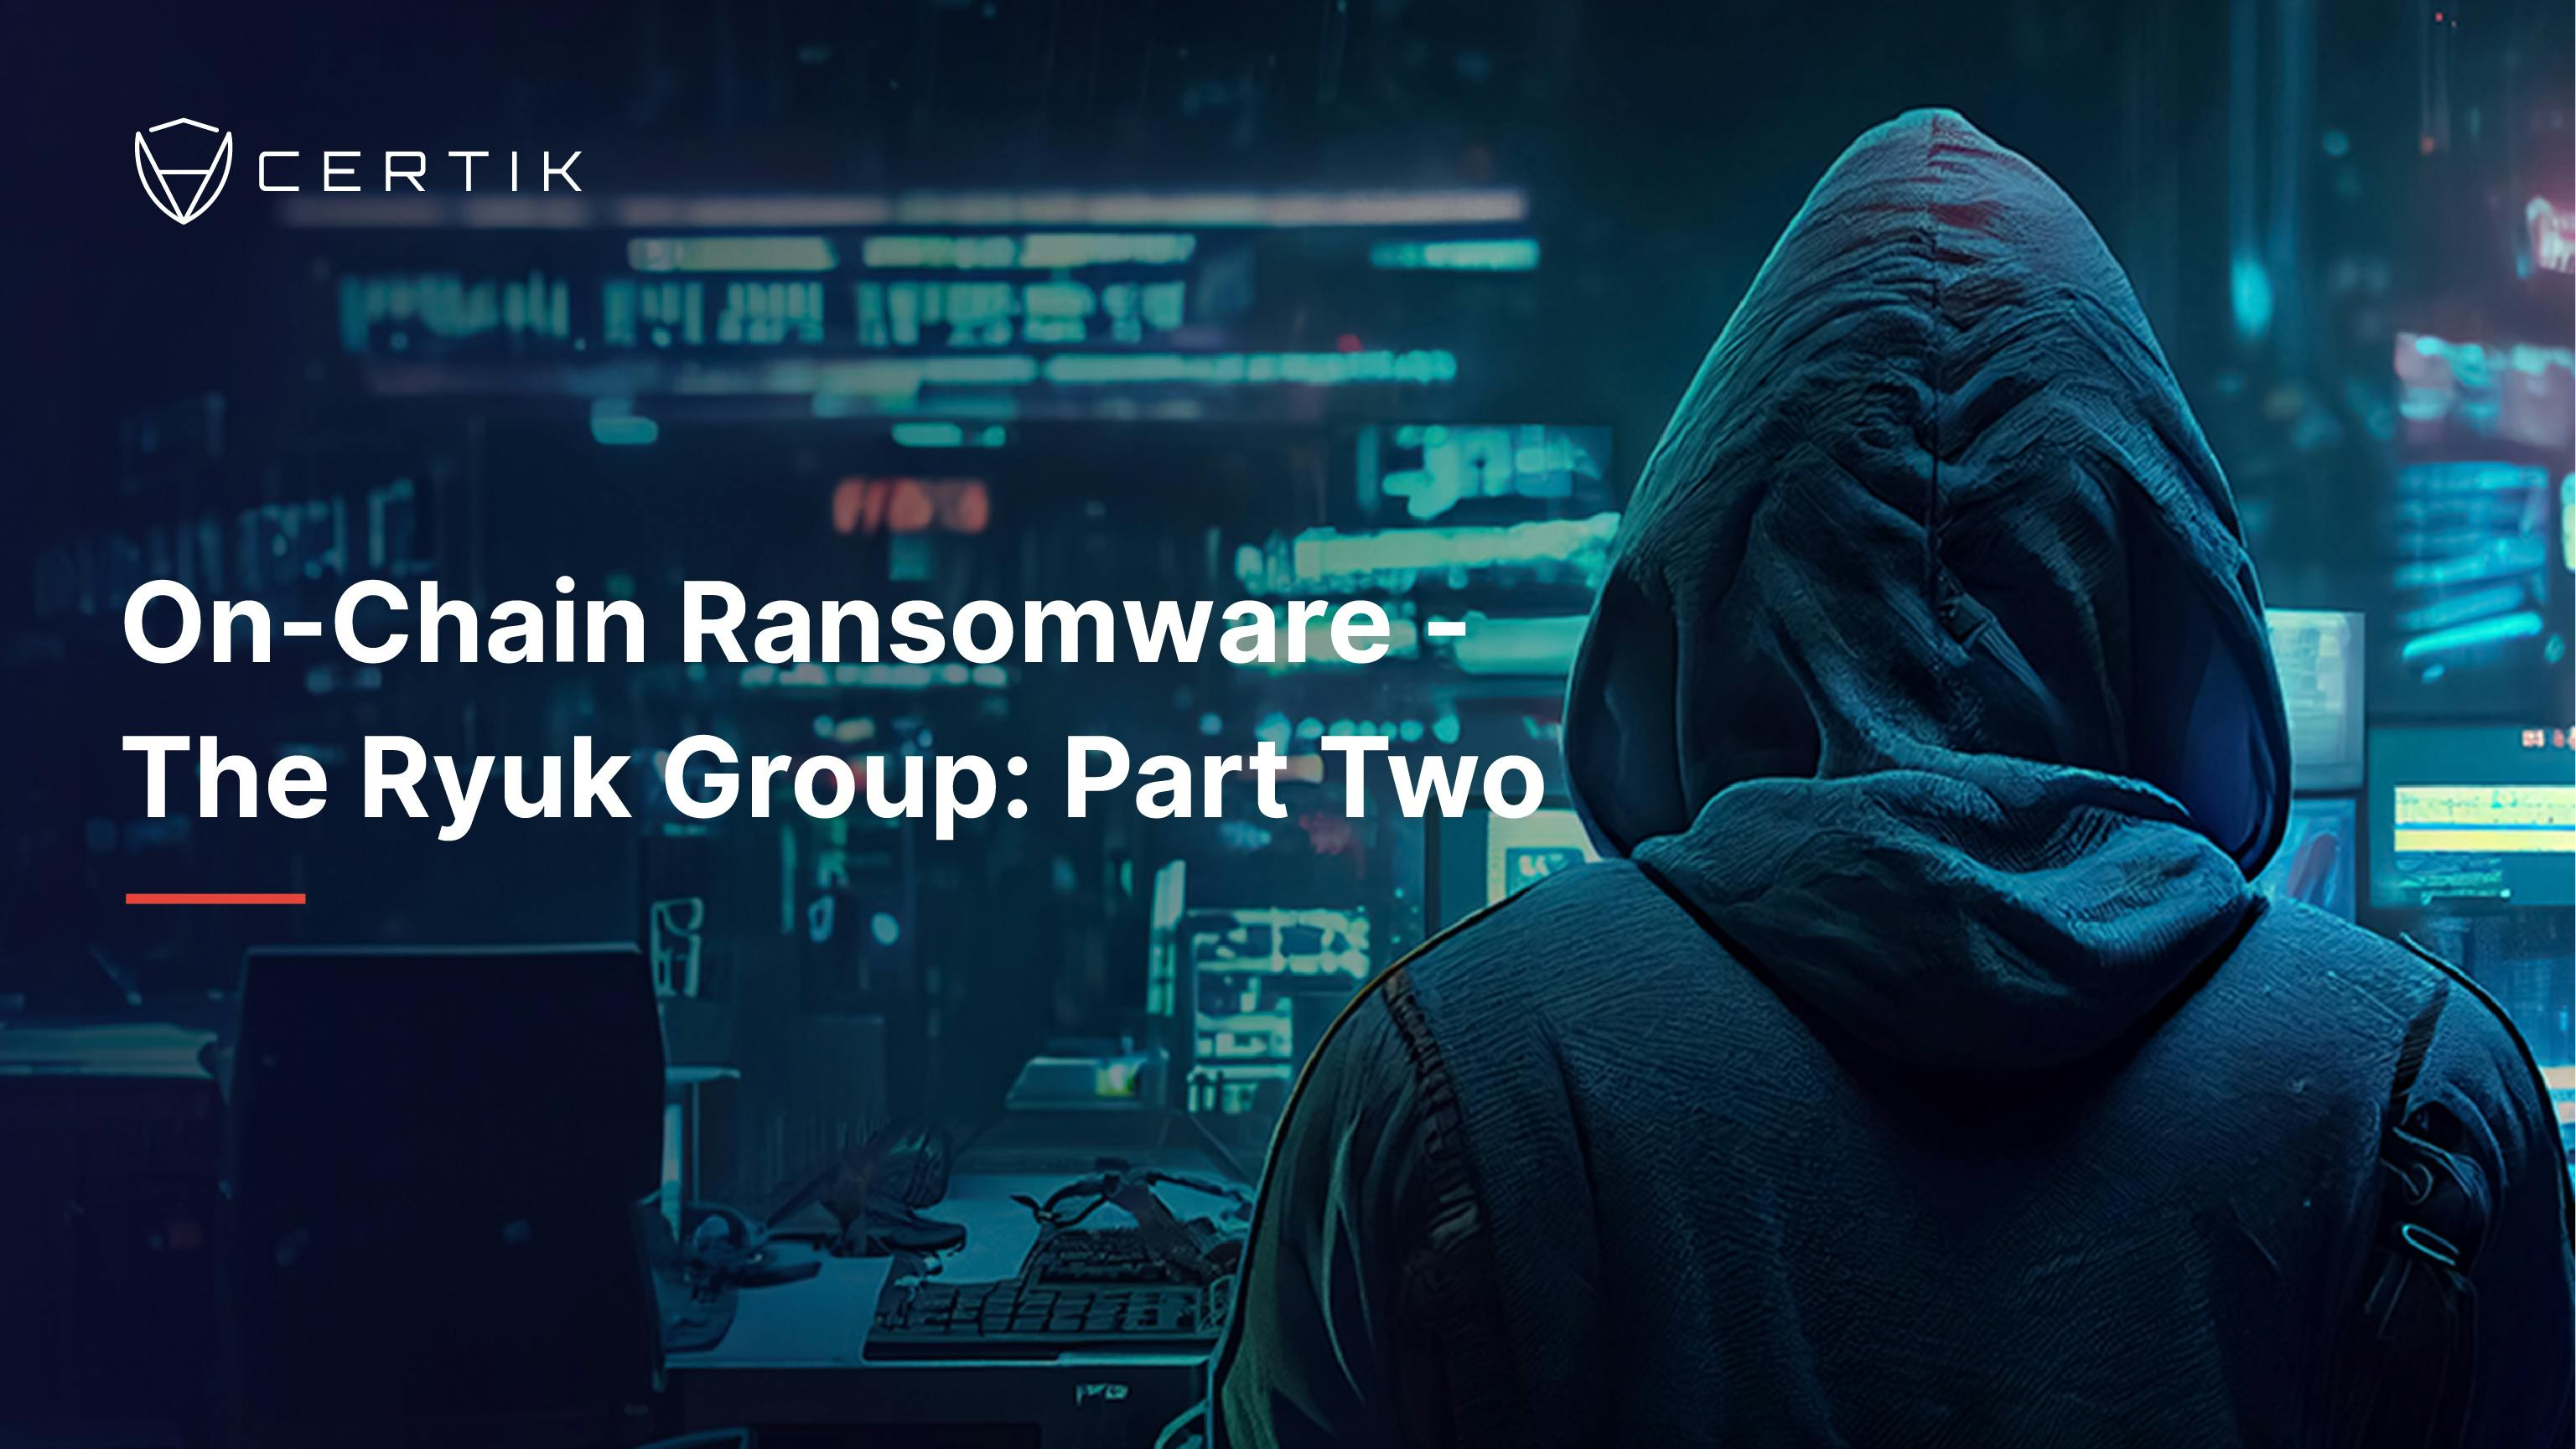 On-Chain Ransomware - The Ryuk Group: Part Two